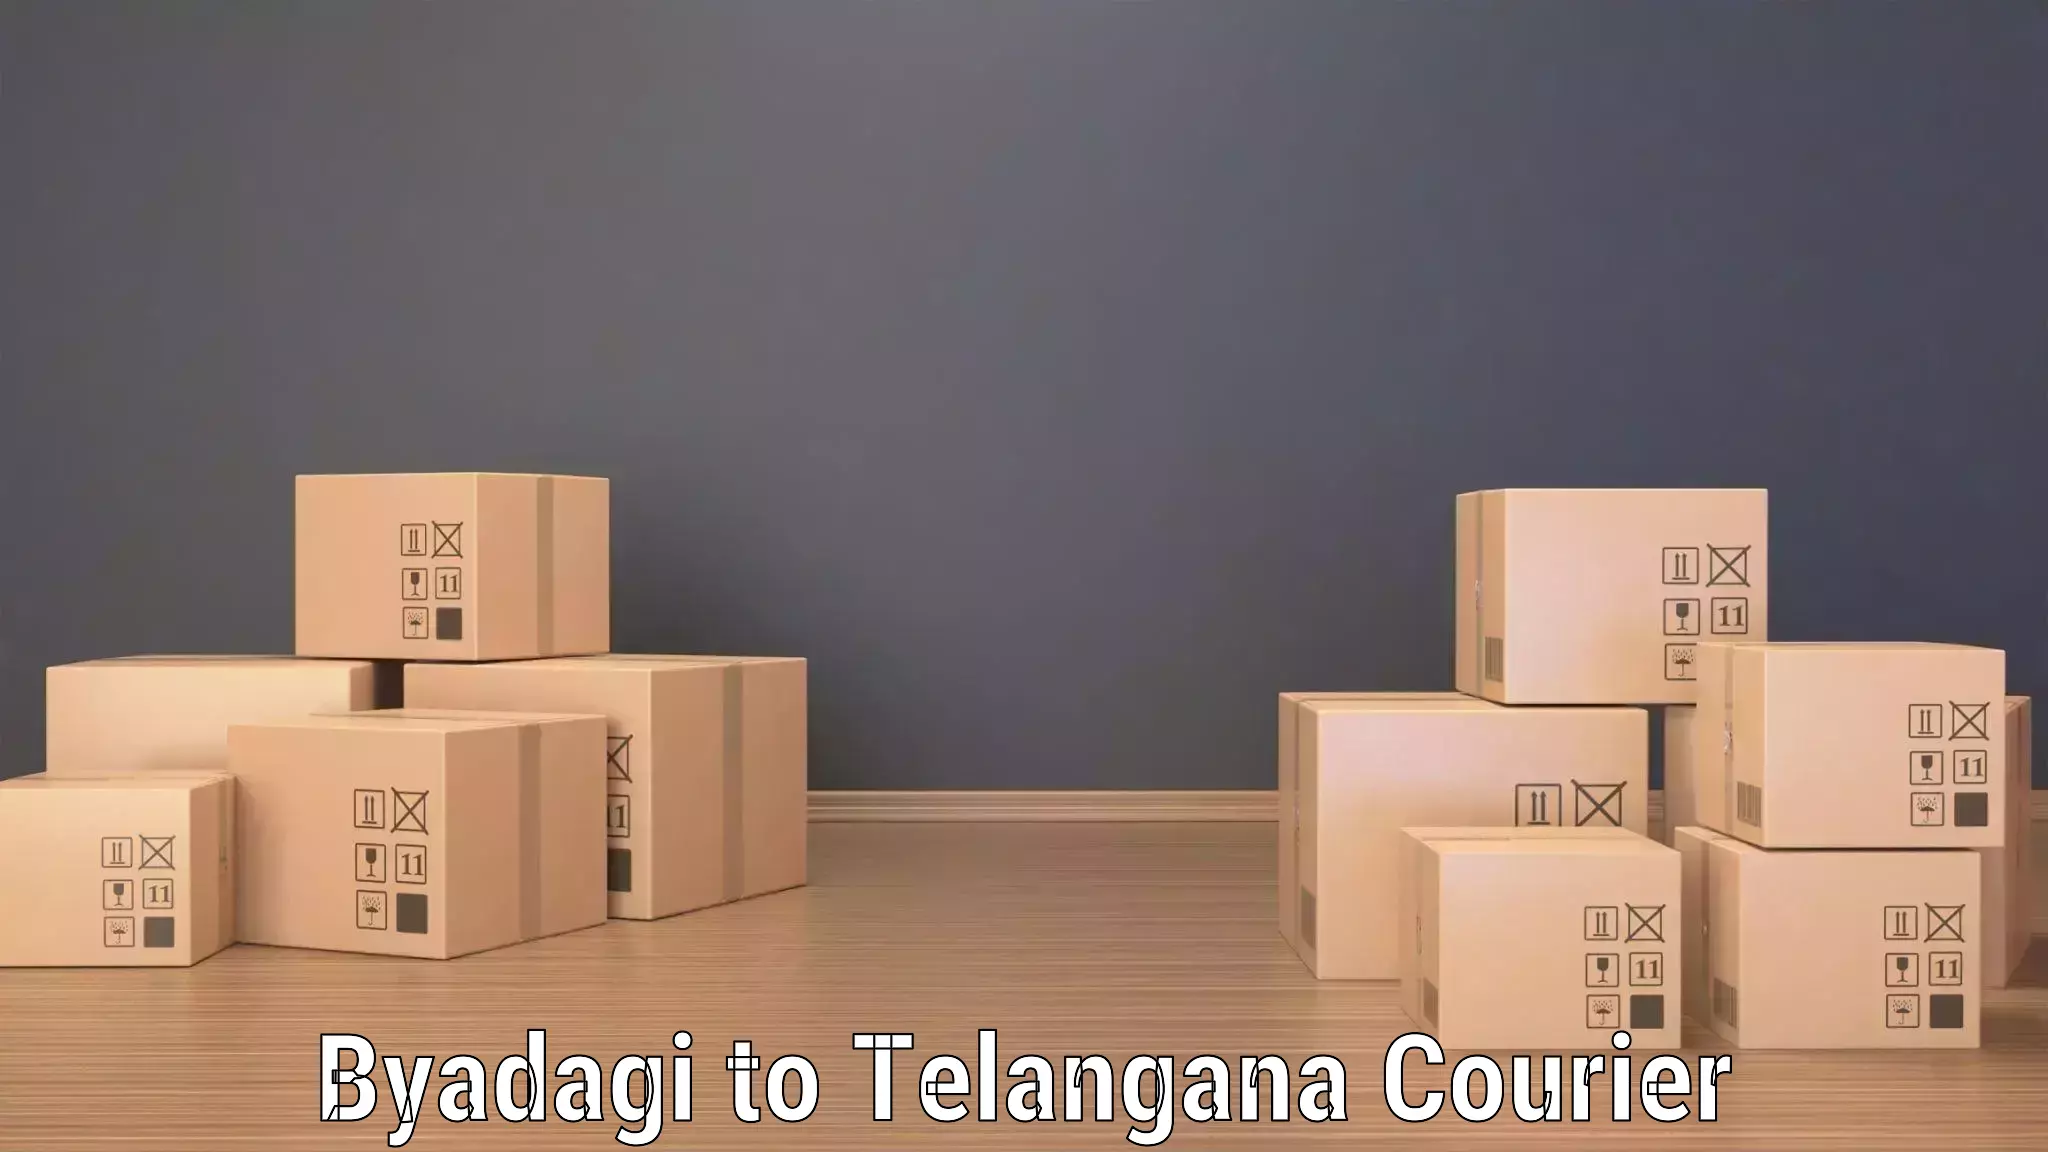 Easy access courier services in Byadagi to Bejjanki